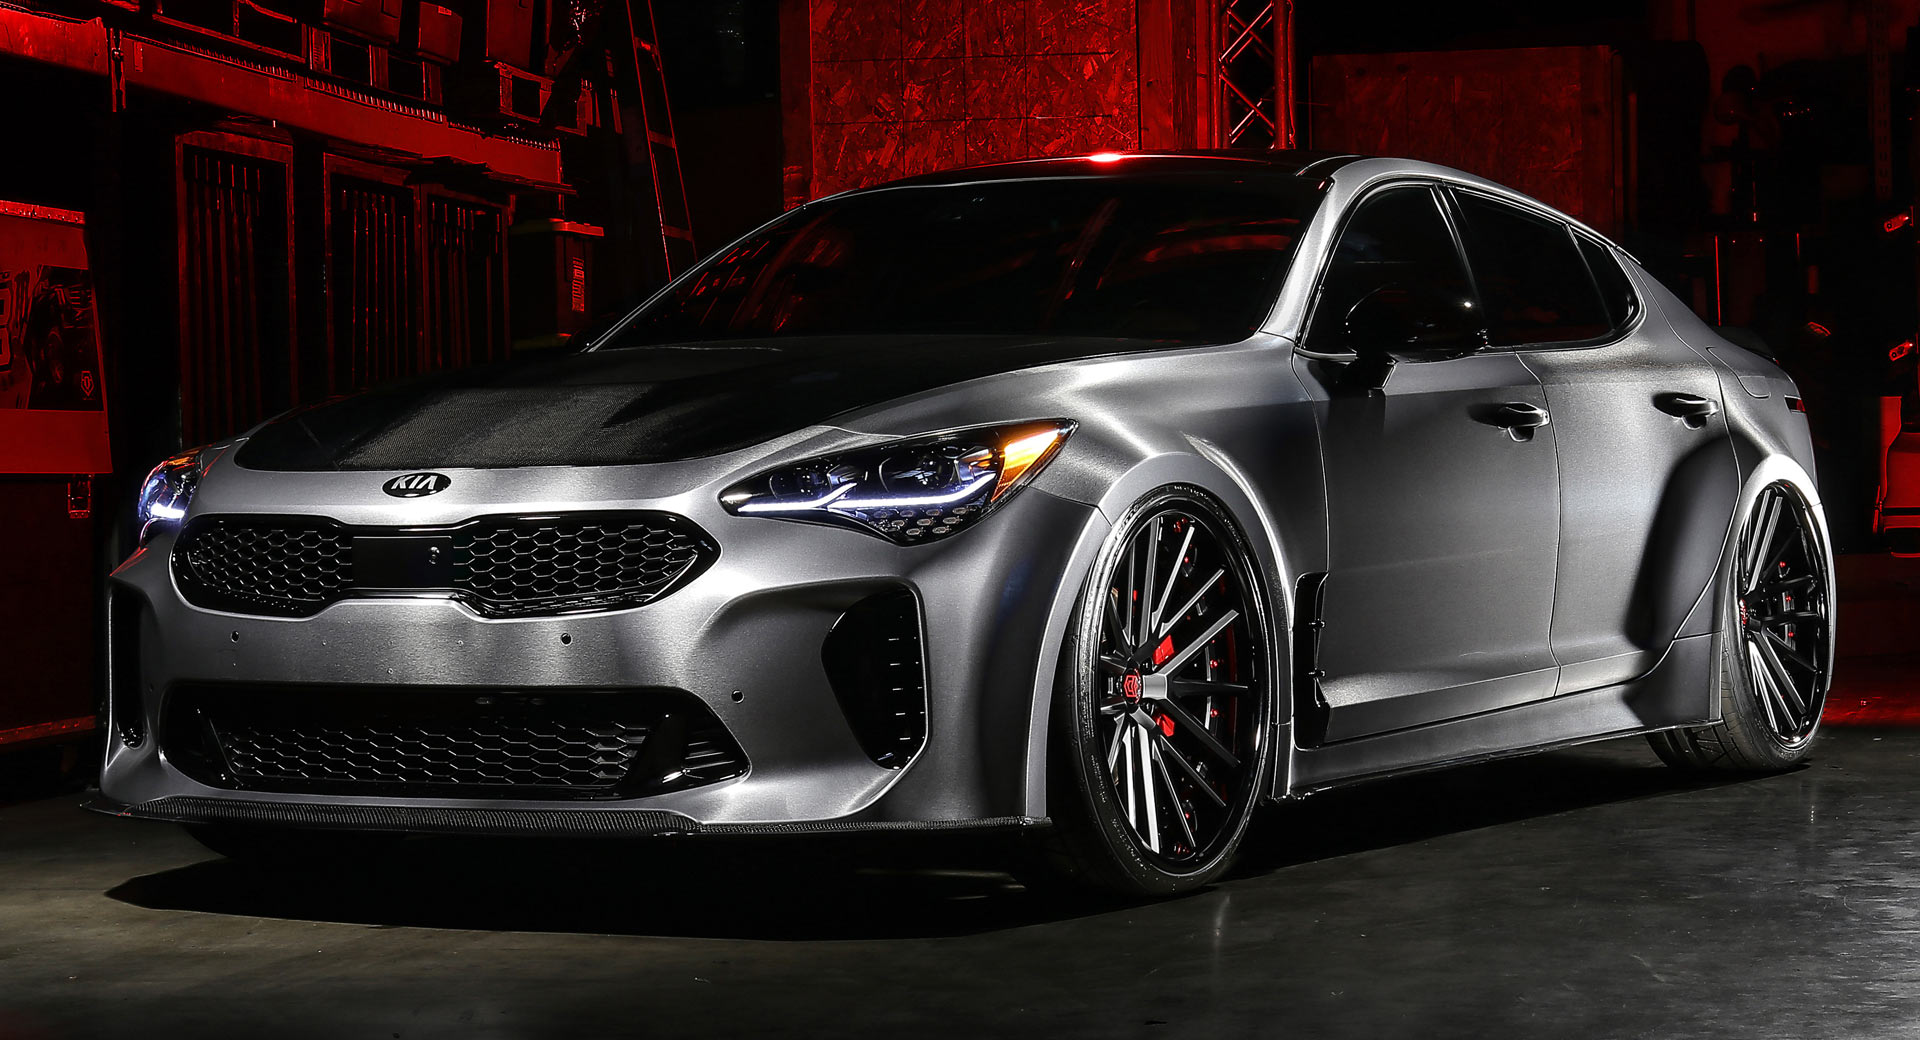 Kia DUBs Out At SEMA With K900 And Stinger GT Concepts Carscoops.